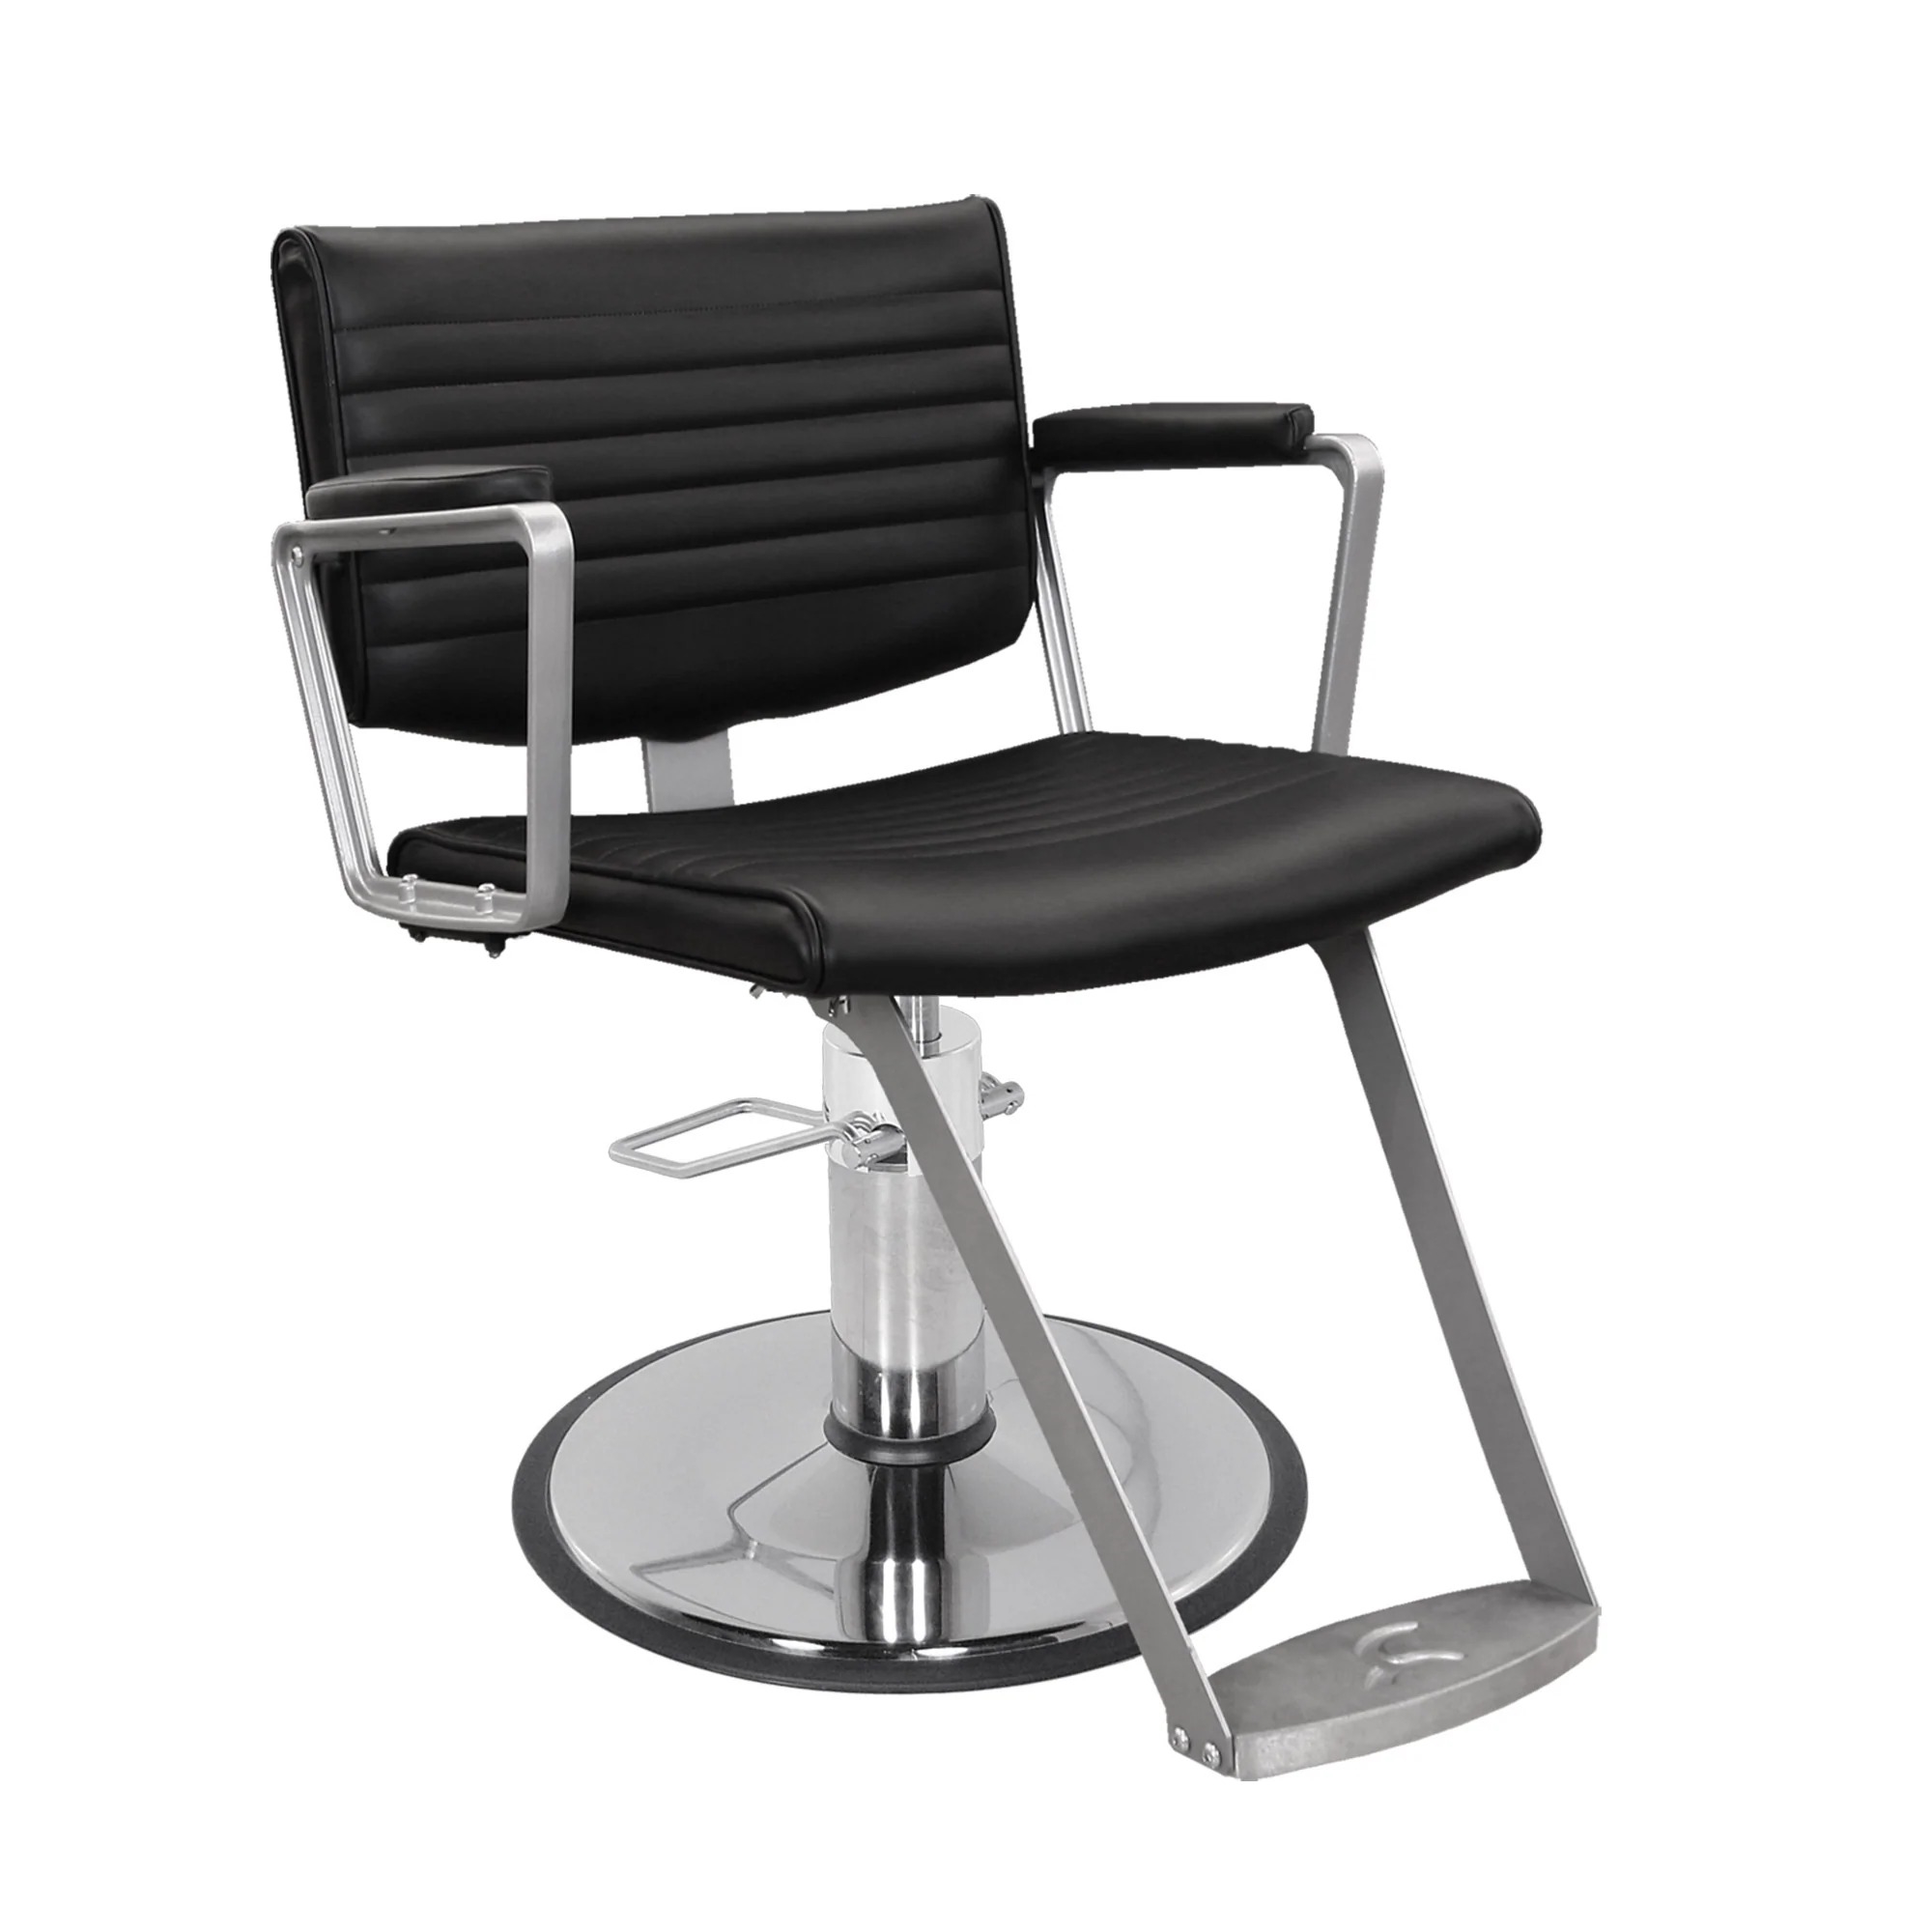 Collins ALUMA Styling Chair - COL-7800